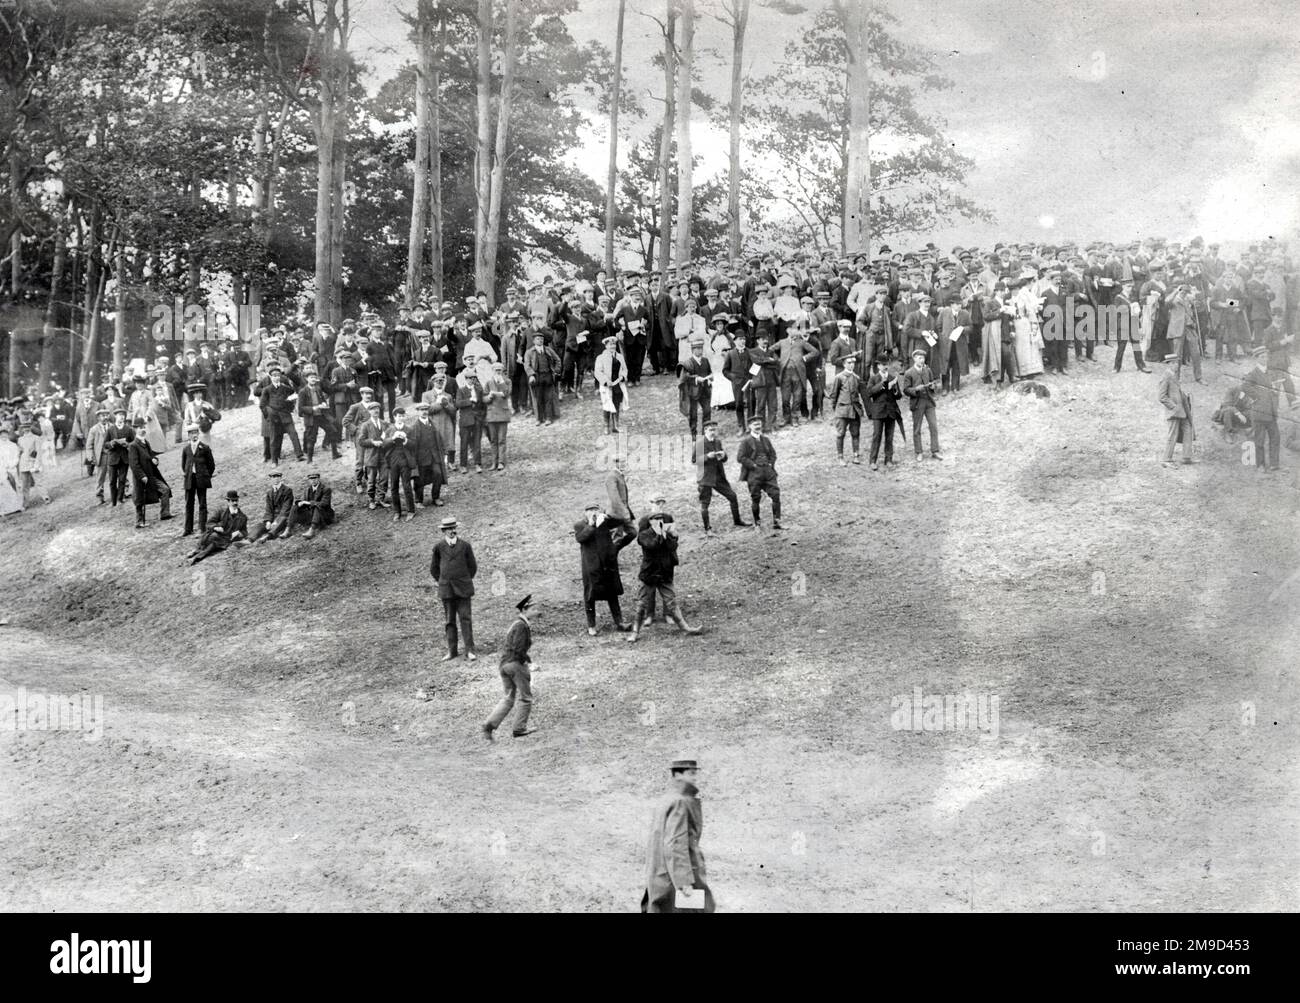 Crowds on Members' Banking - Brooklands. Stockfoto